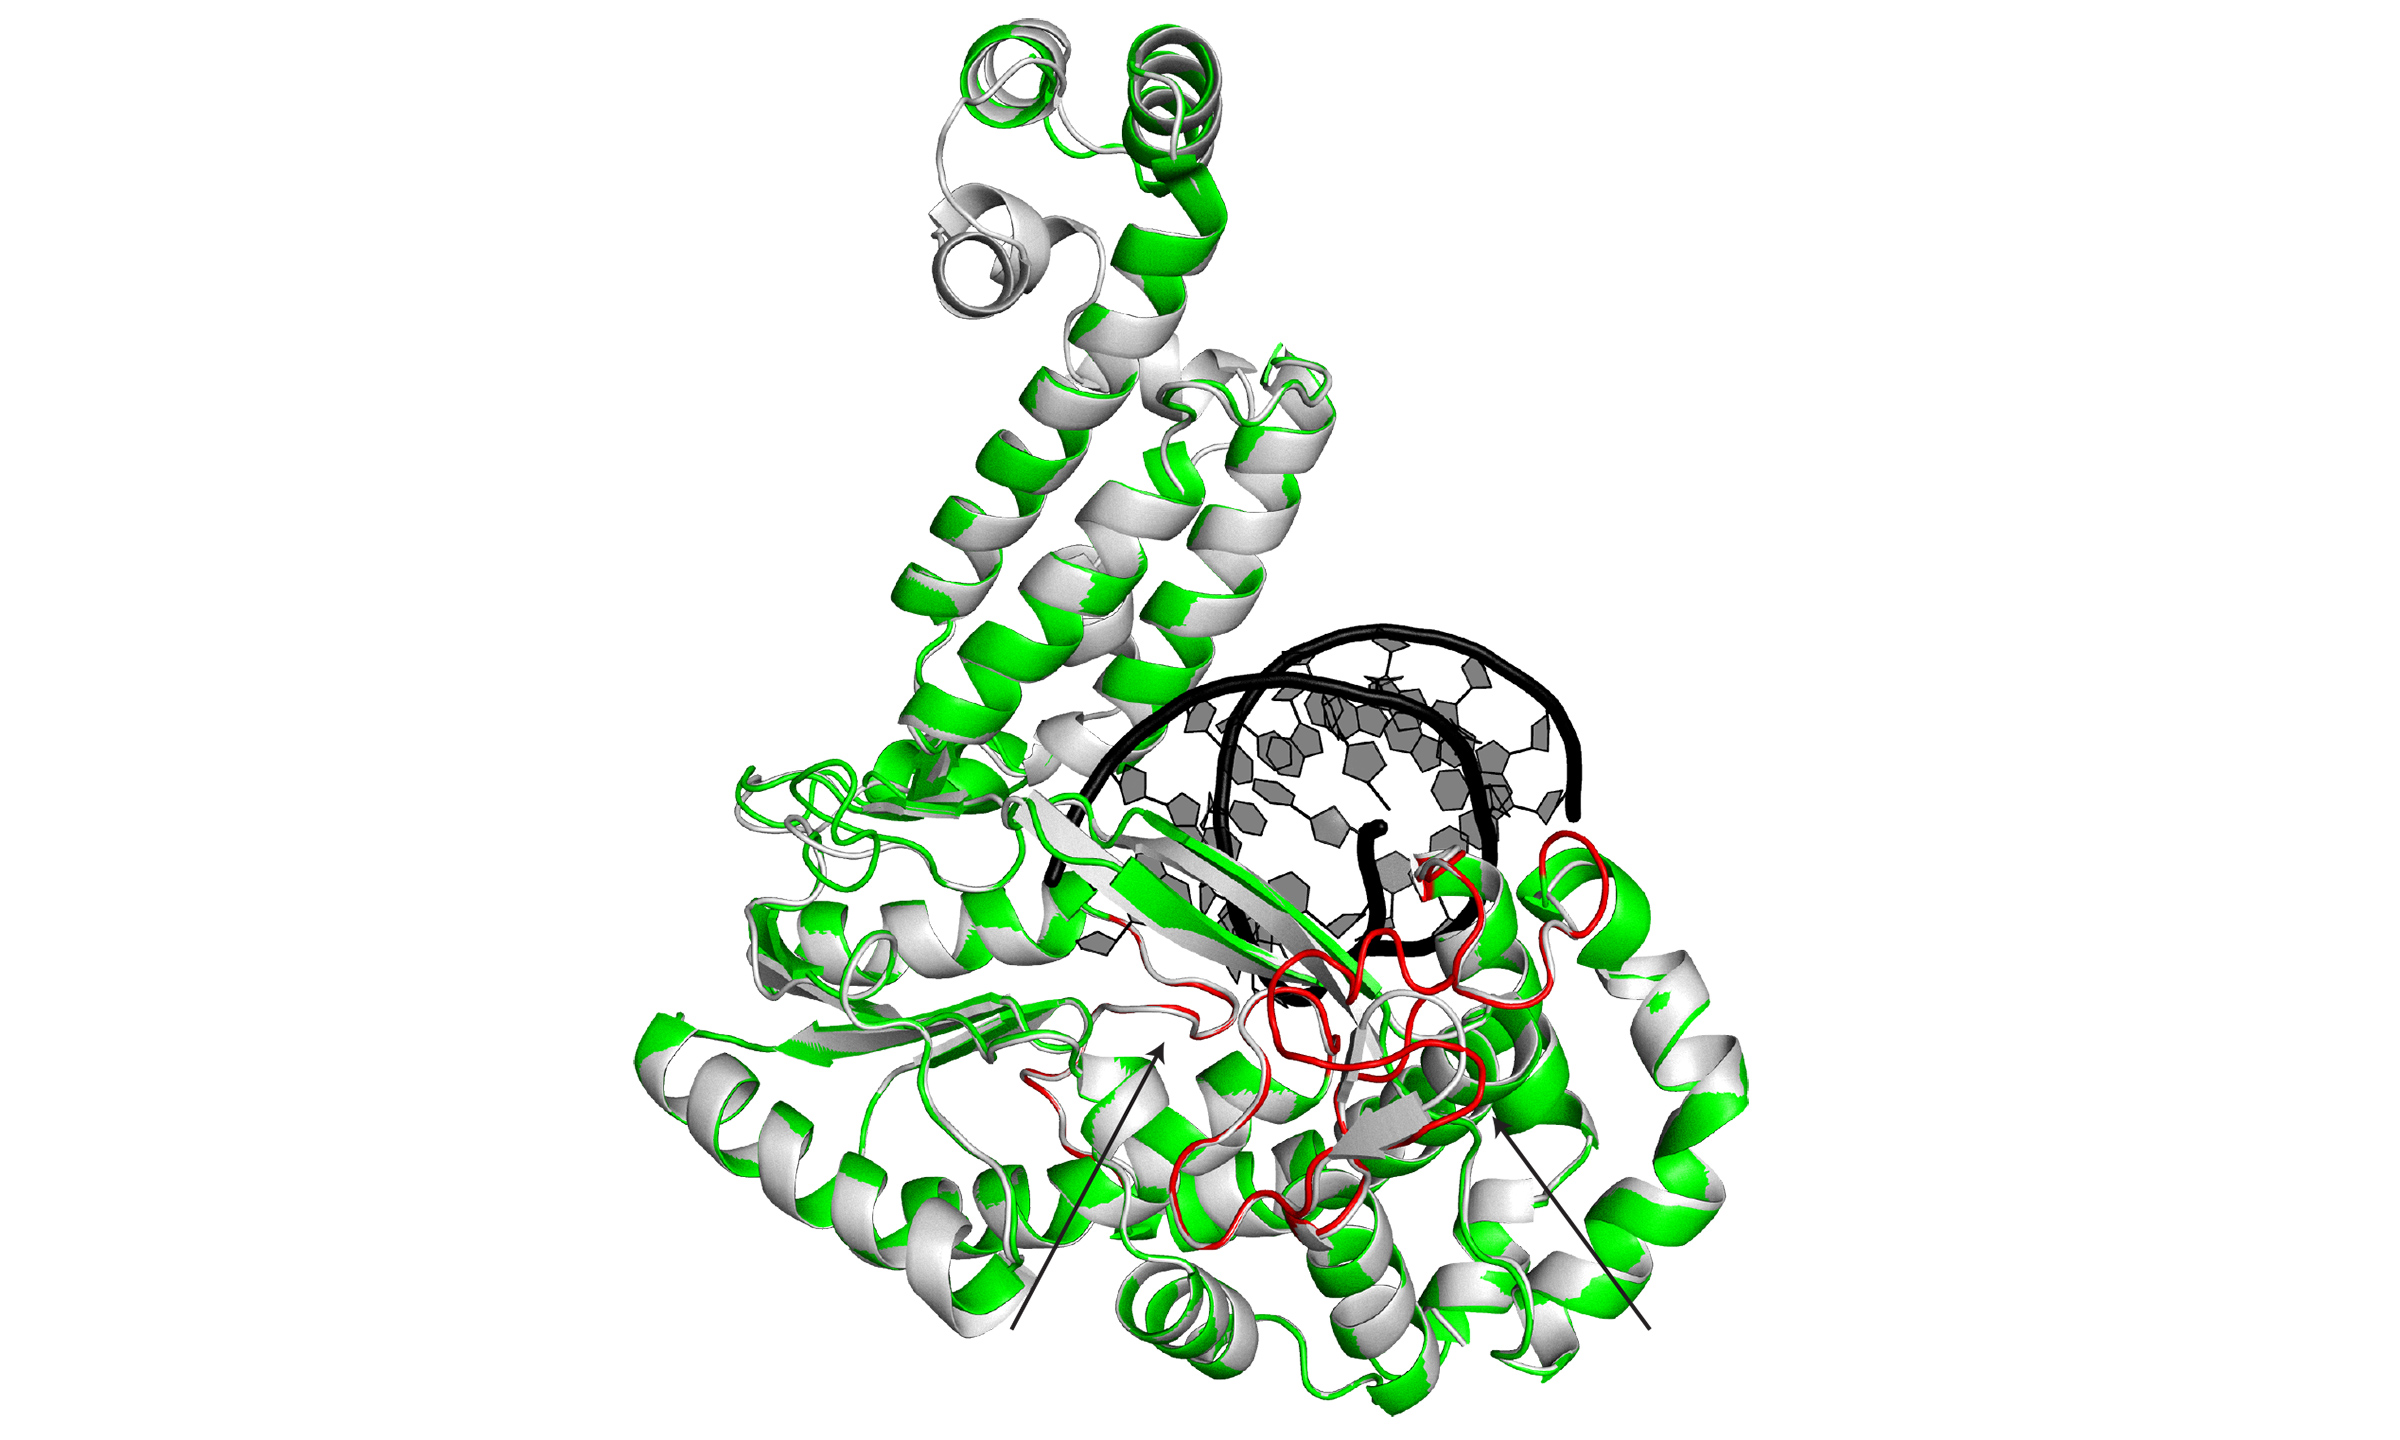 Illustration of a protein that looks like a tangle of curled ribbons in white, grey and green